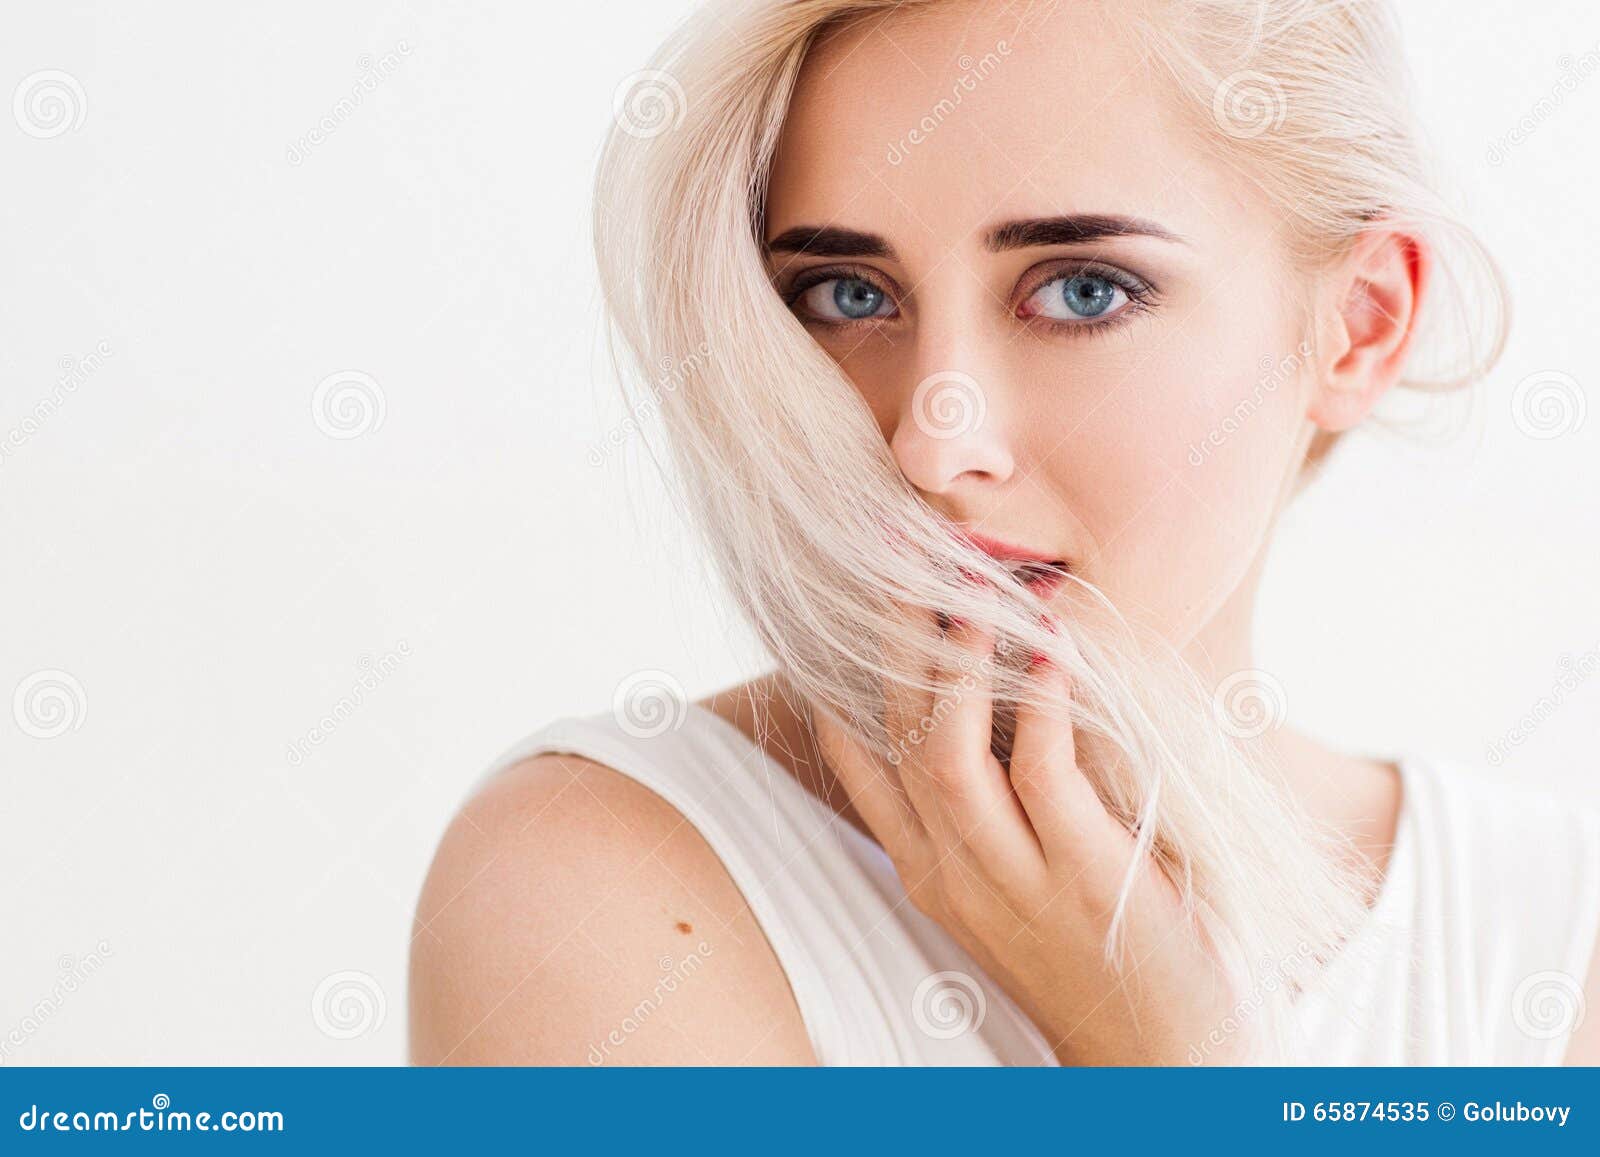 Trustful And Shy Woman With Blonde Hair Stock Image Image Of